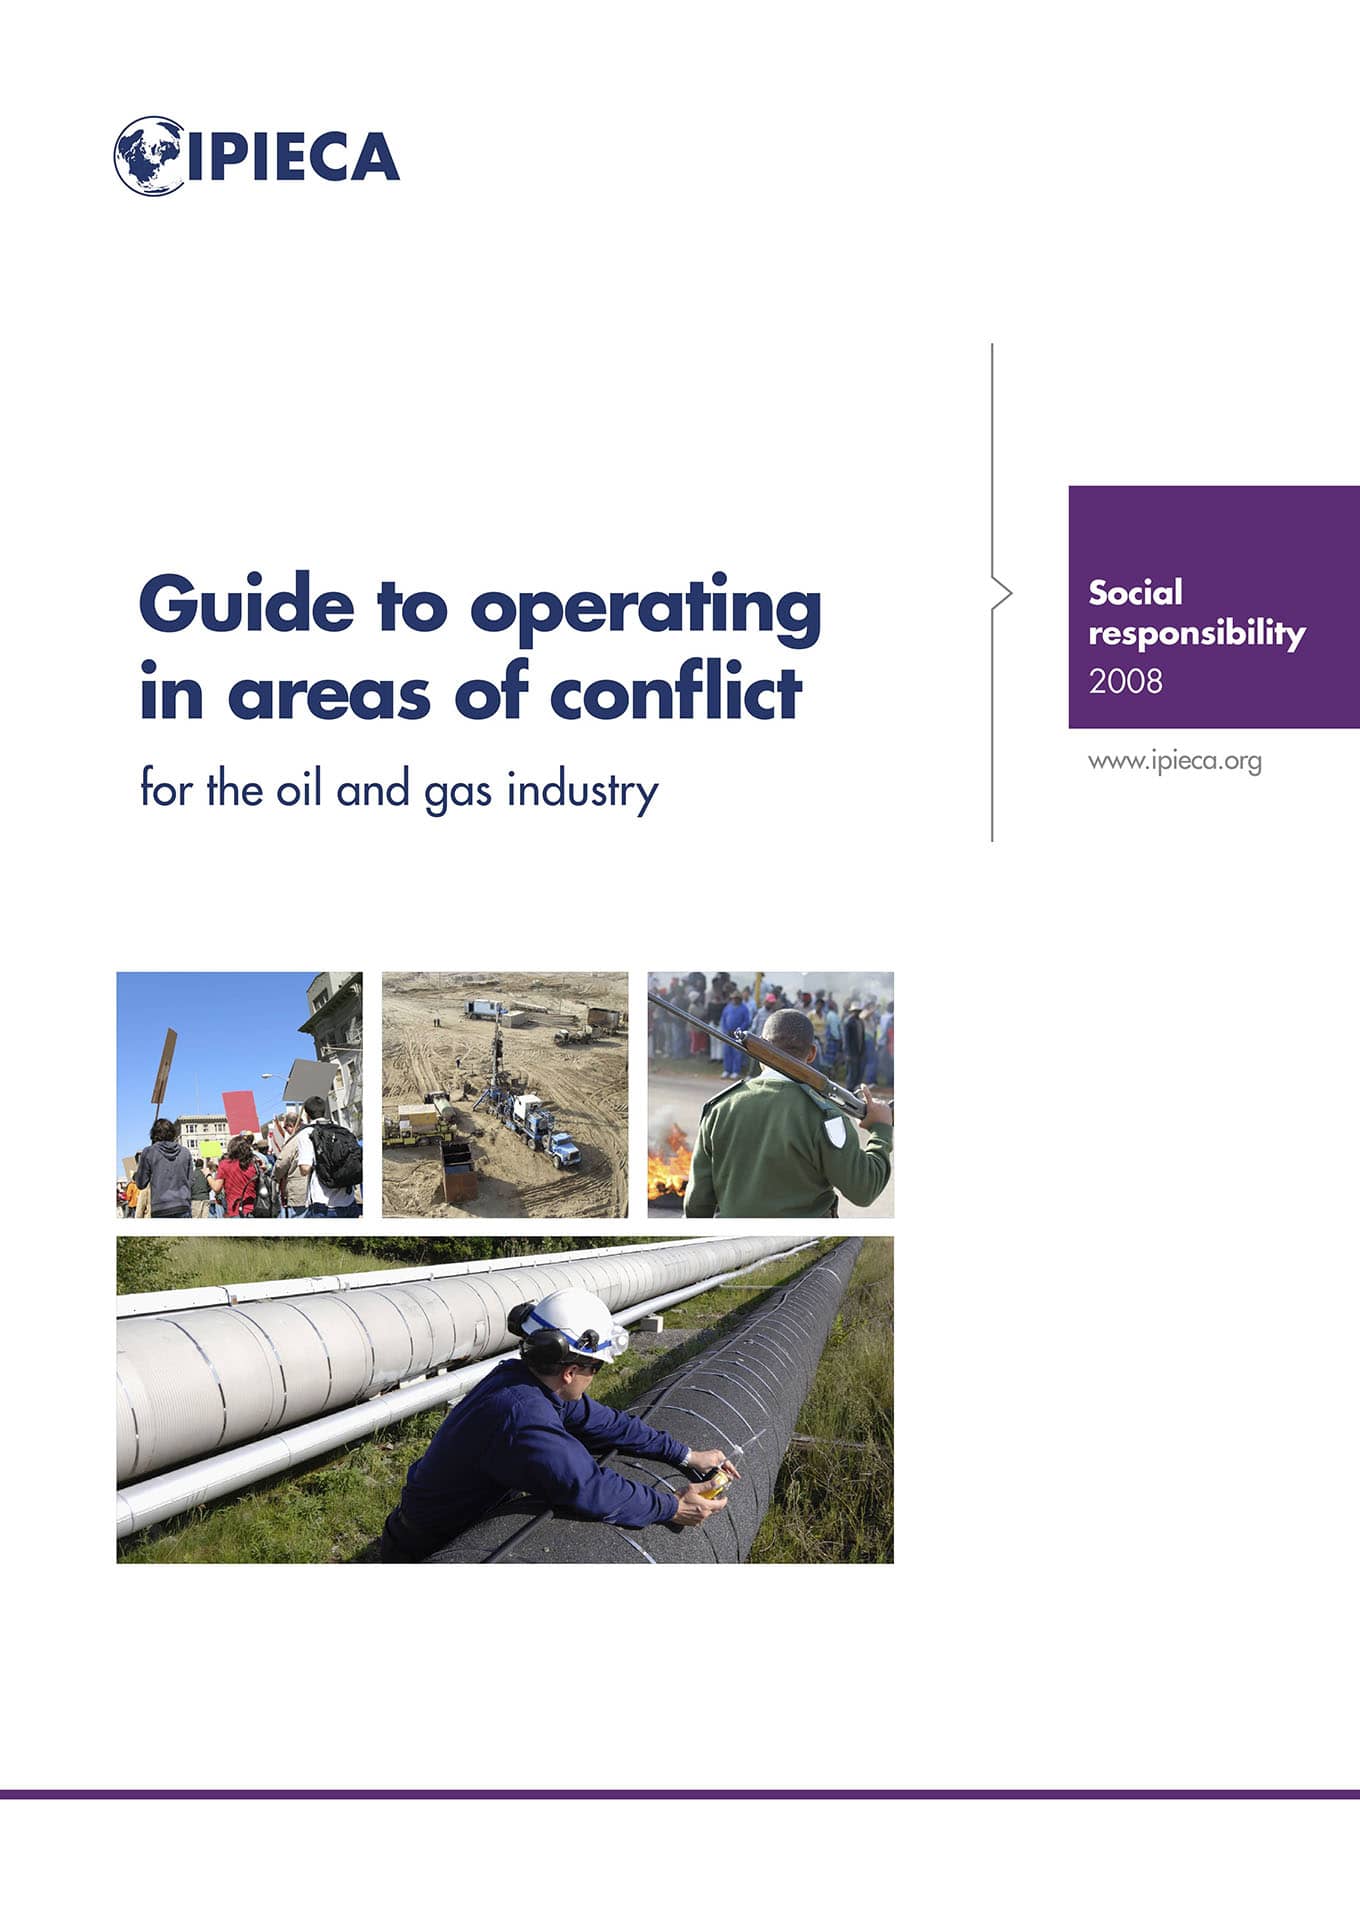 Guide to Operating in Areas of Conflict for the Oil and Gas Industry (IPIECA, 2008)